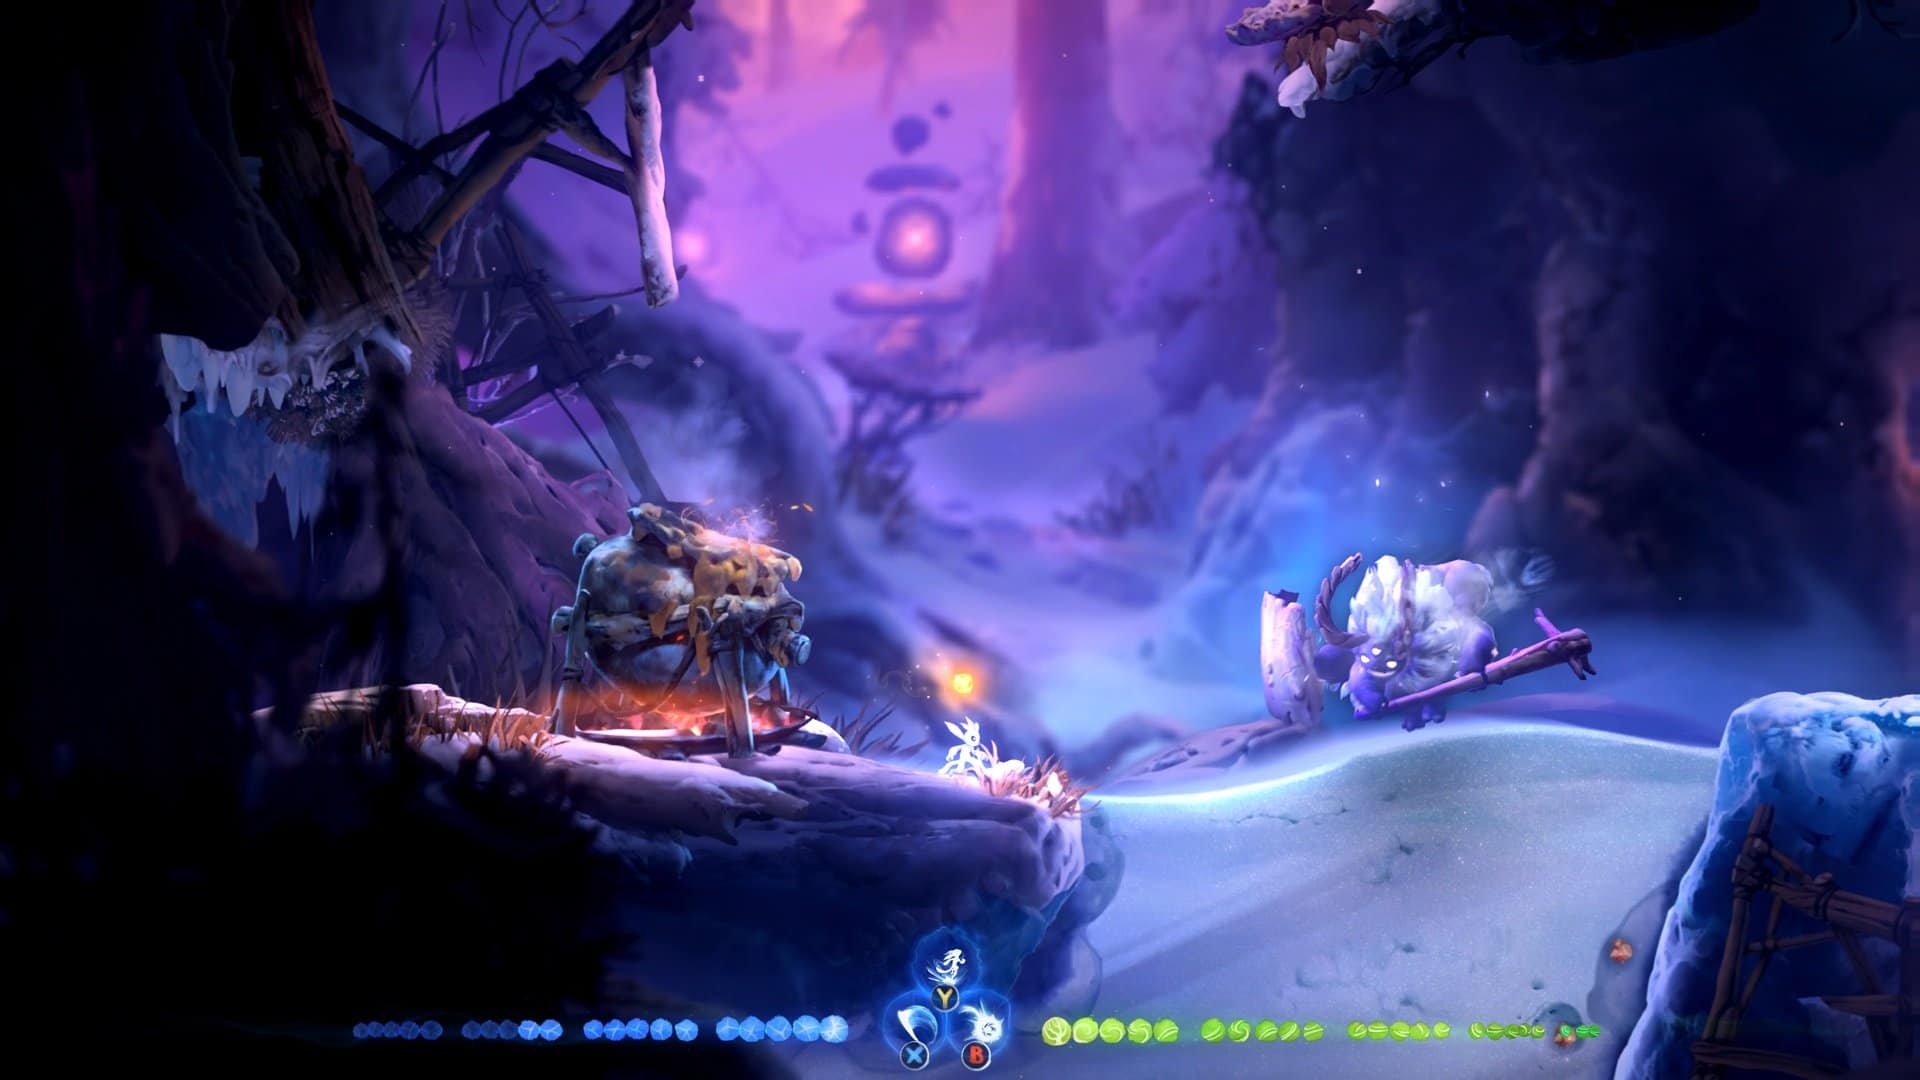 [IMG 2] Ori and the Will of the Wisps, Ori and the Will of the Wisps Farm Luce Spirituale, Ori and the Will of the Wisps Farming Spot, Guida Ori and the Will of the Wisps, Ori 2 Xbox One